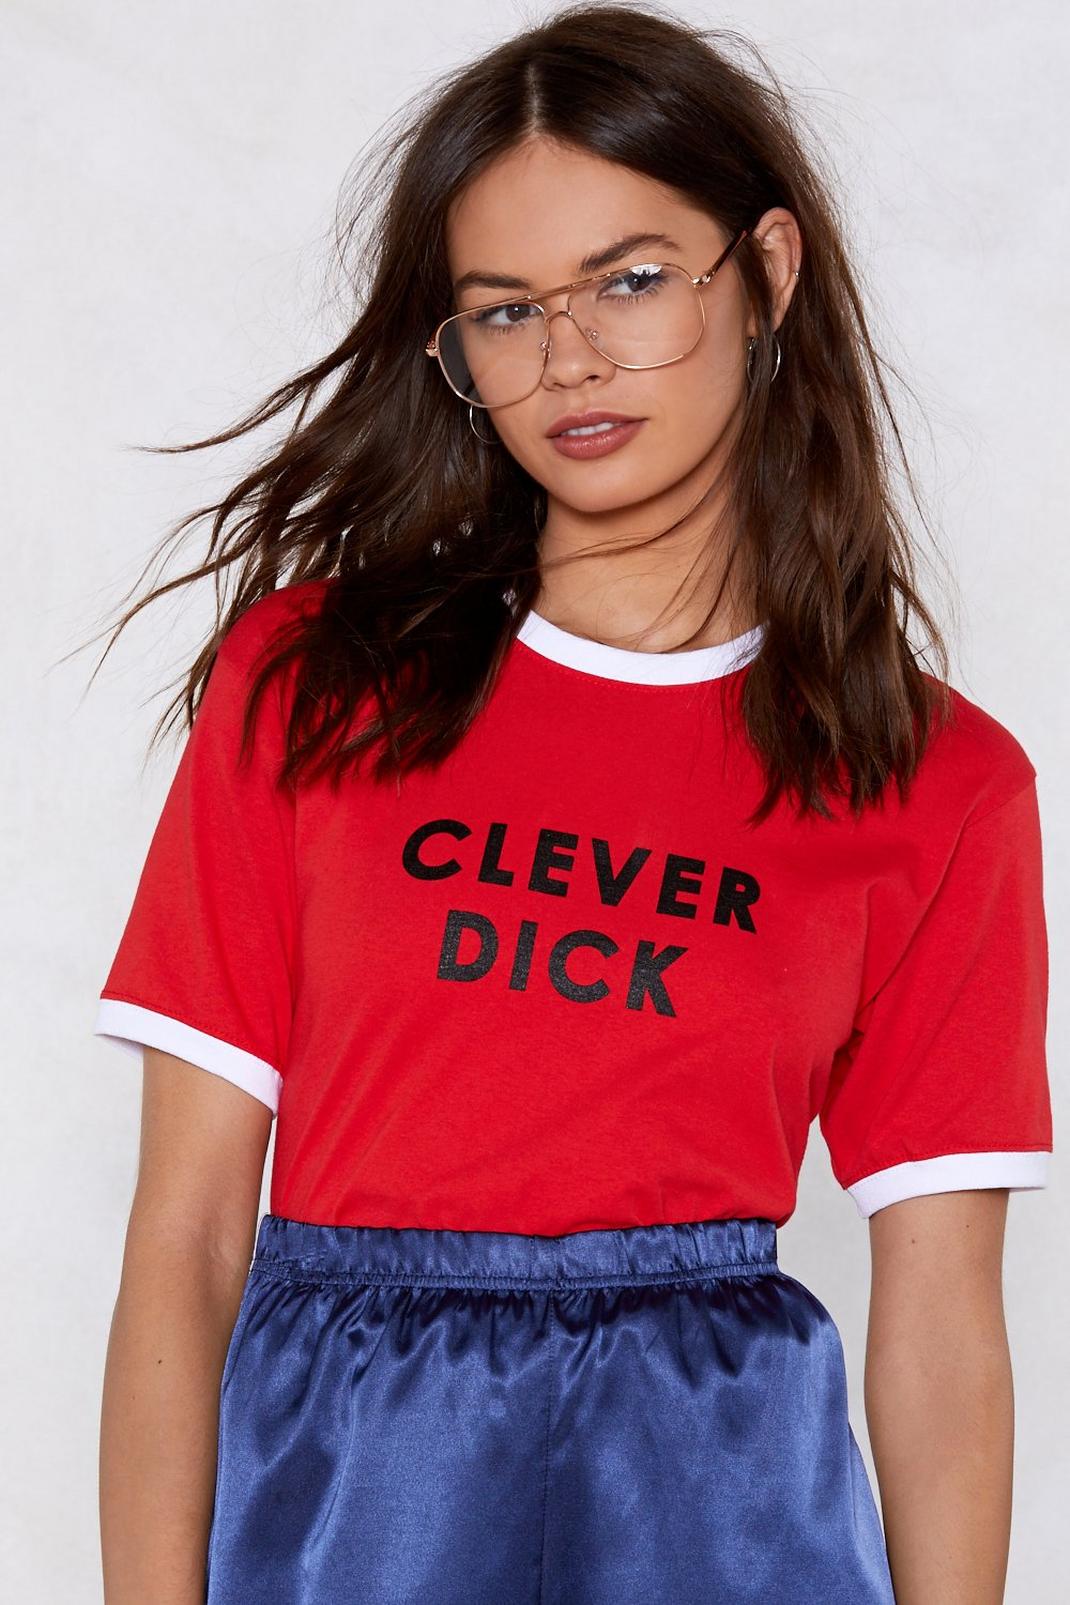 Clever Dick Ringer Tee image number 1